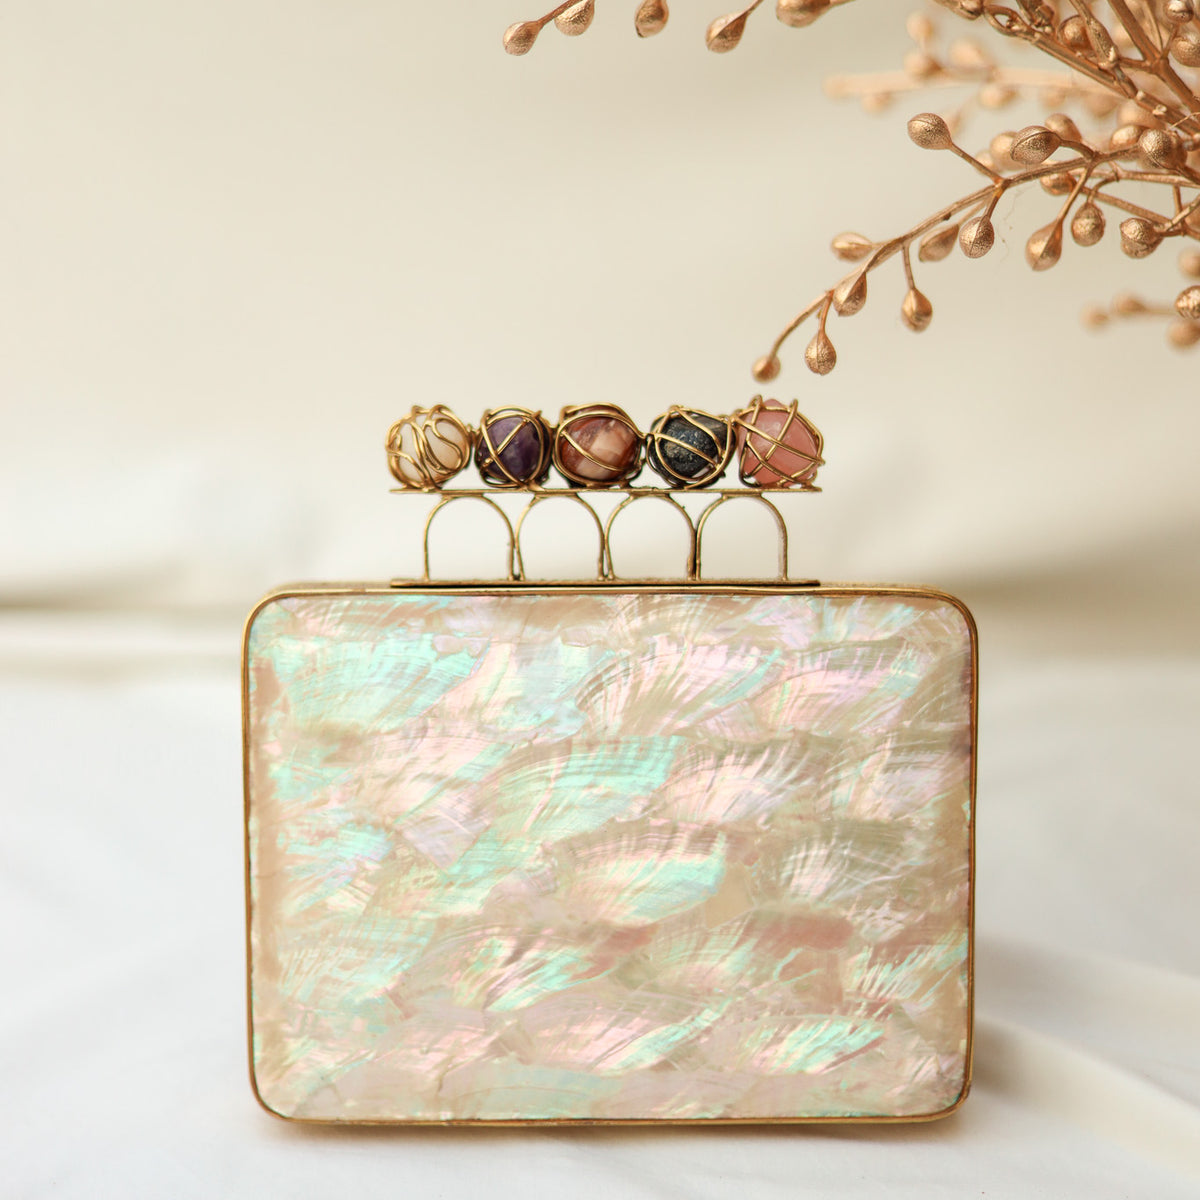 Pearl Acrylic Evening Bag and Clutch Purse